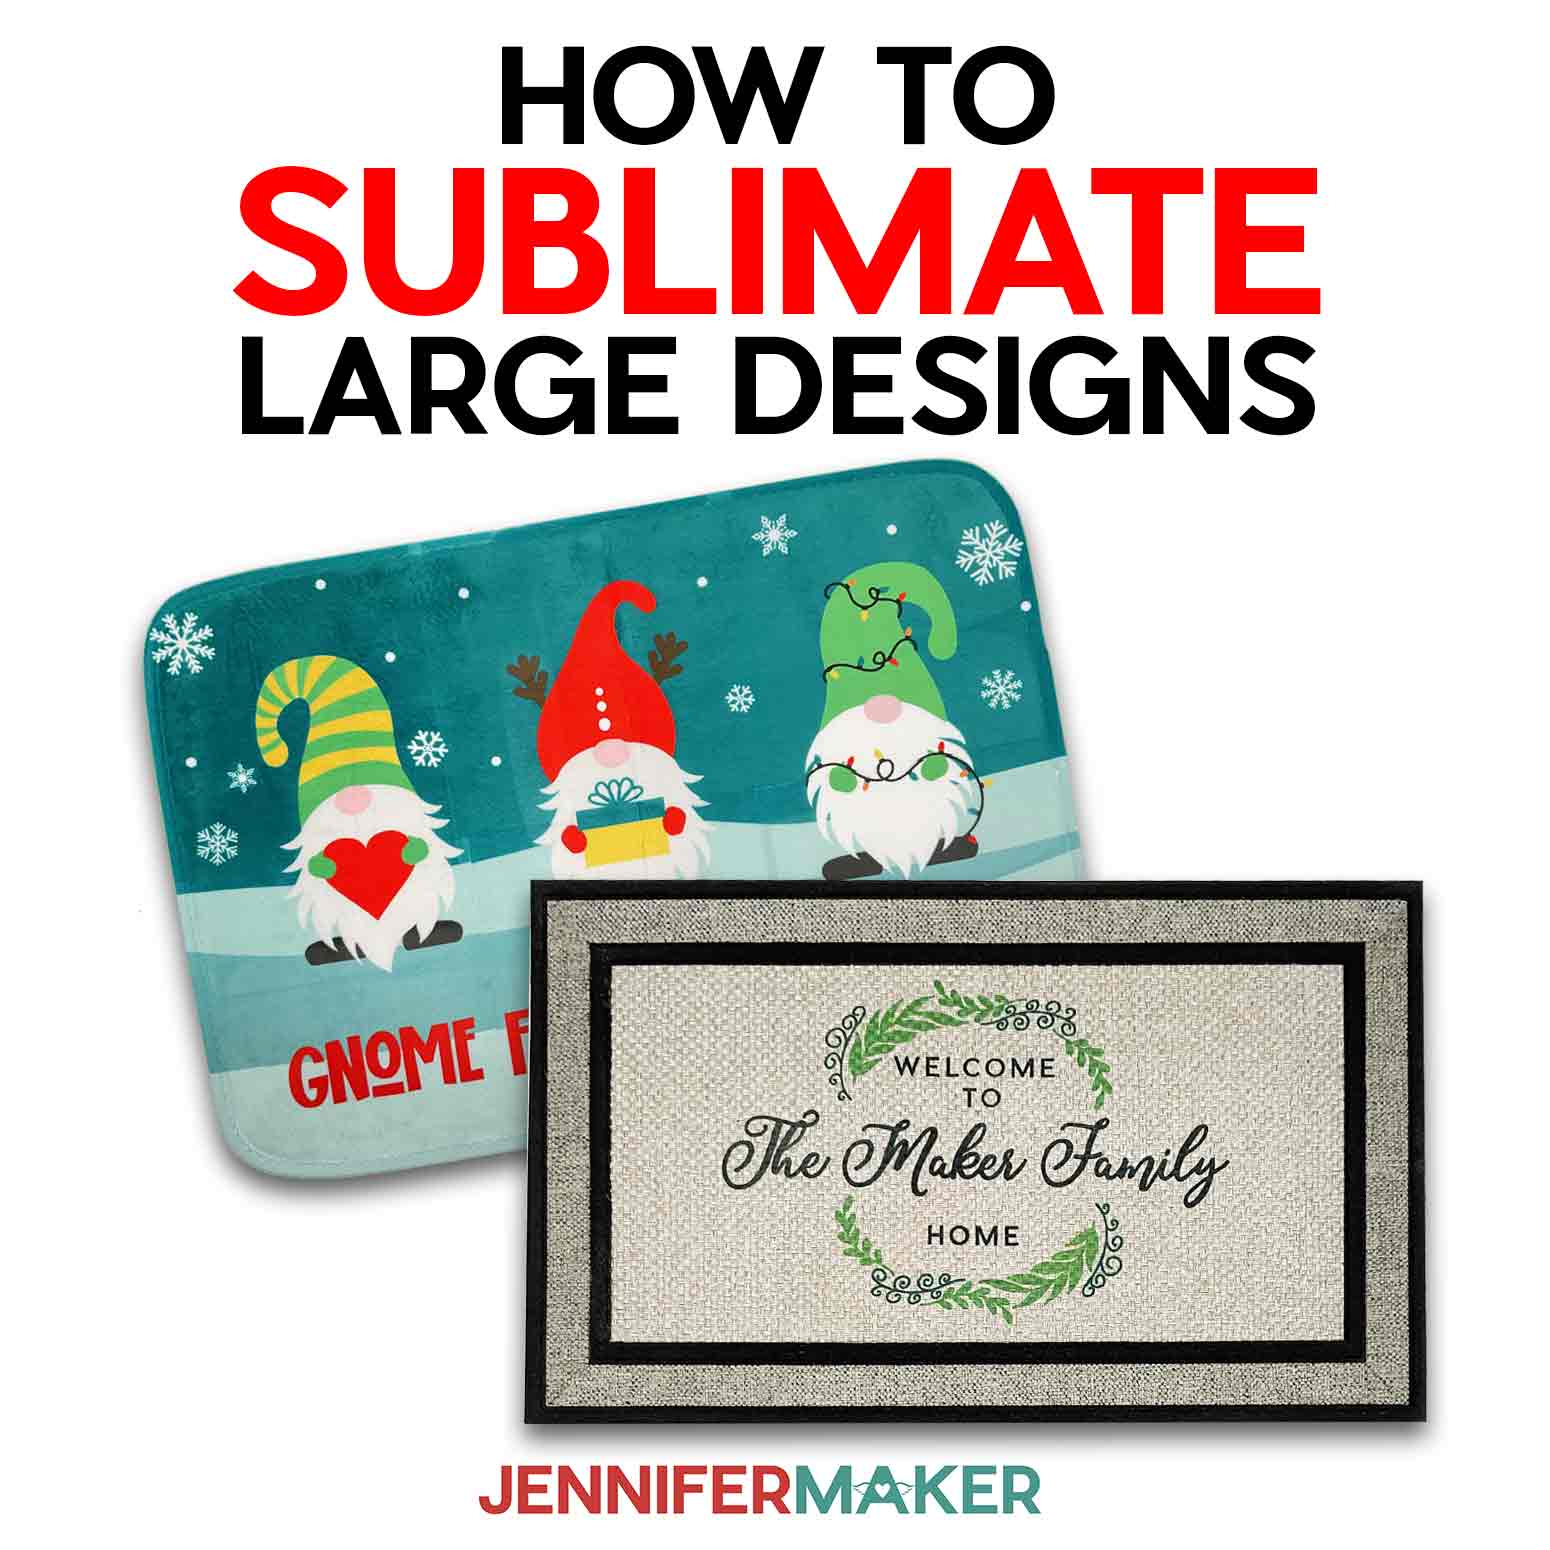 How to Sublimate Large Designs: Let’s Make Custom Doormats!